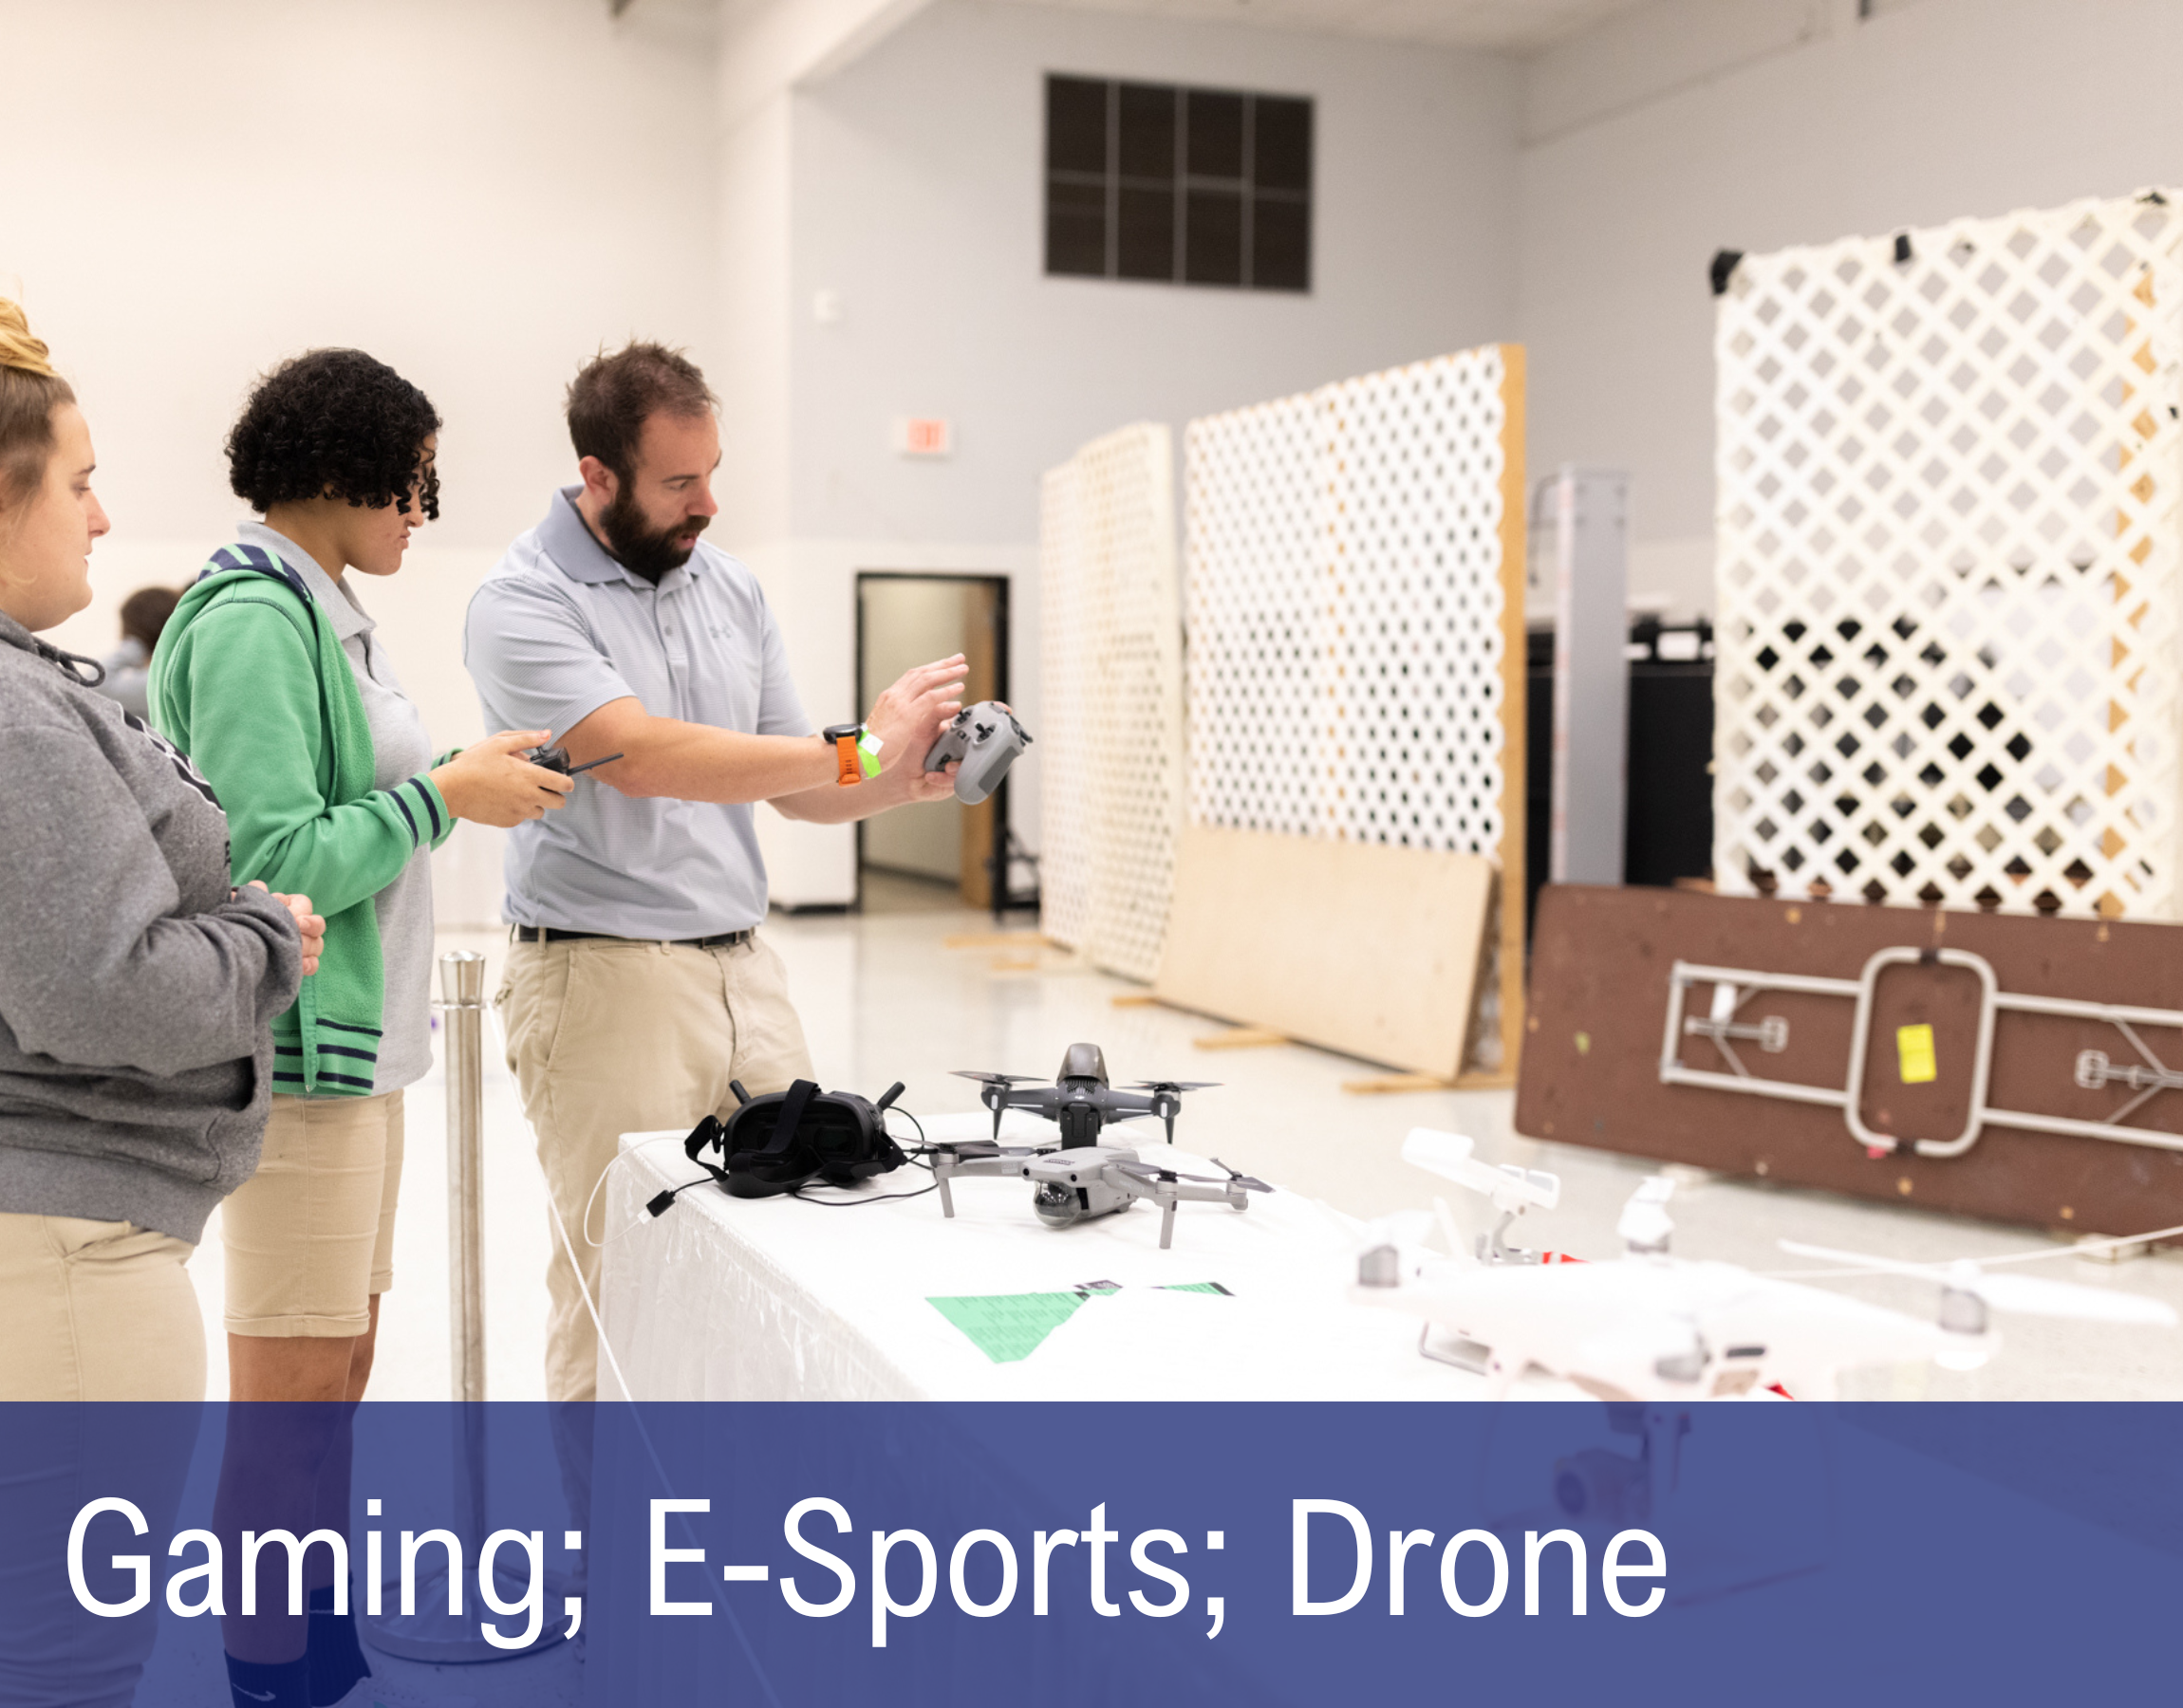 GAMING; E-SPORTS; DRONES